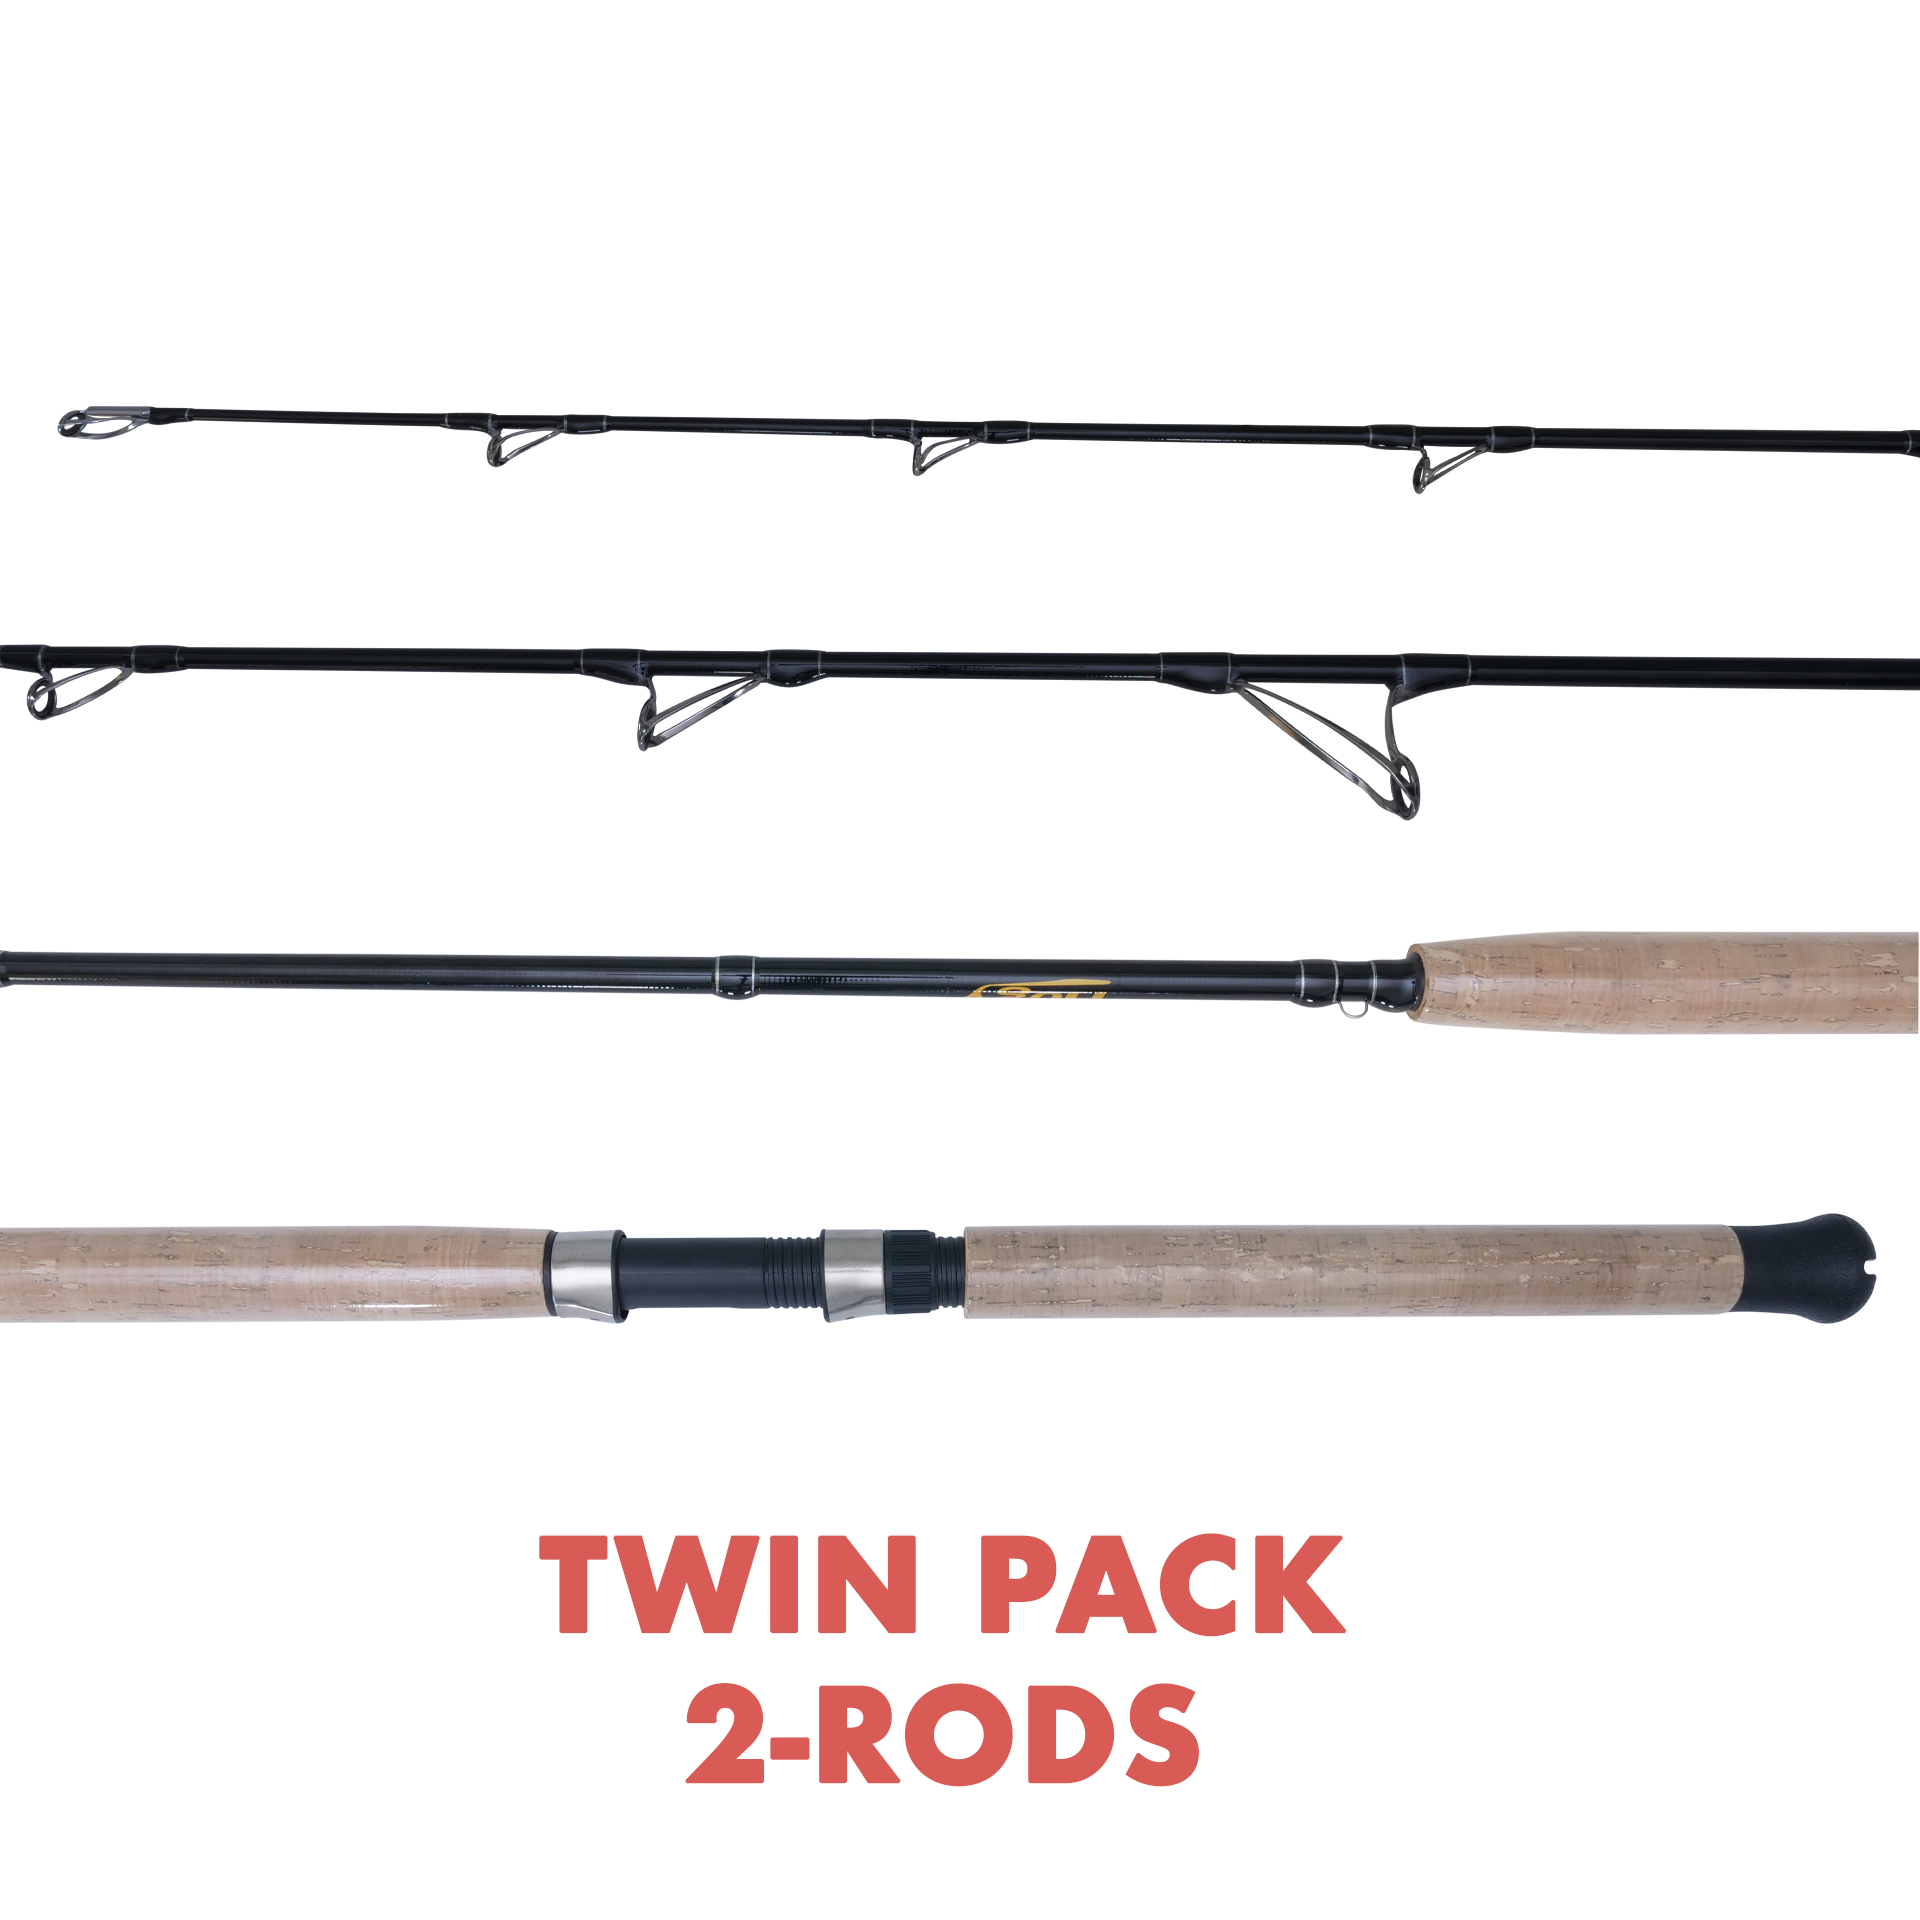 TWIN PACK Tuna Casting Spinning Rod: Mod-Fast Action 7' H (3oz - 8oz)